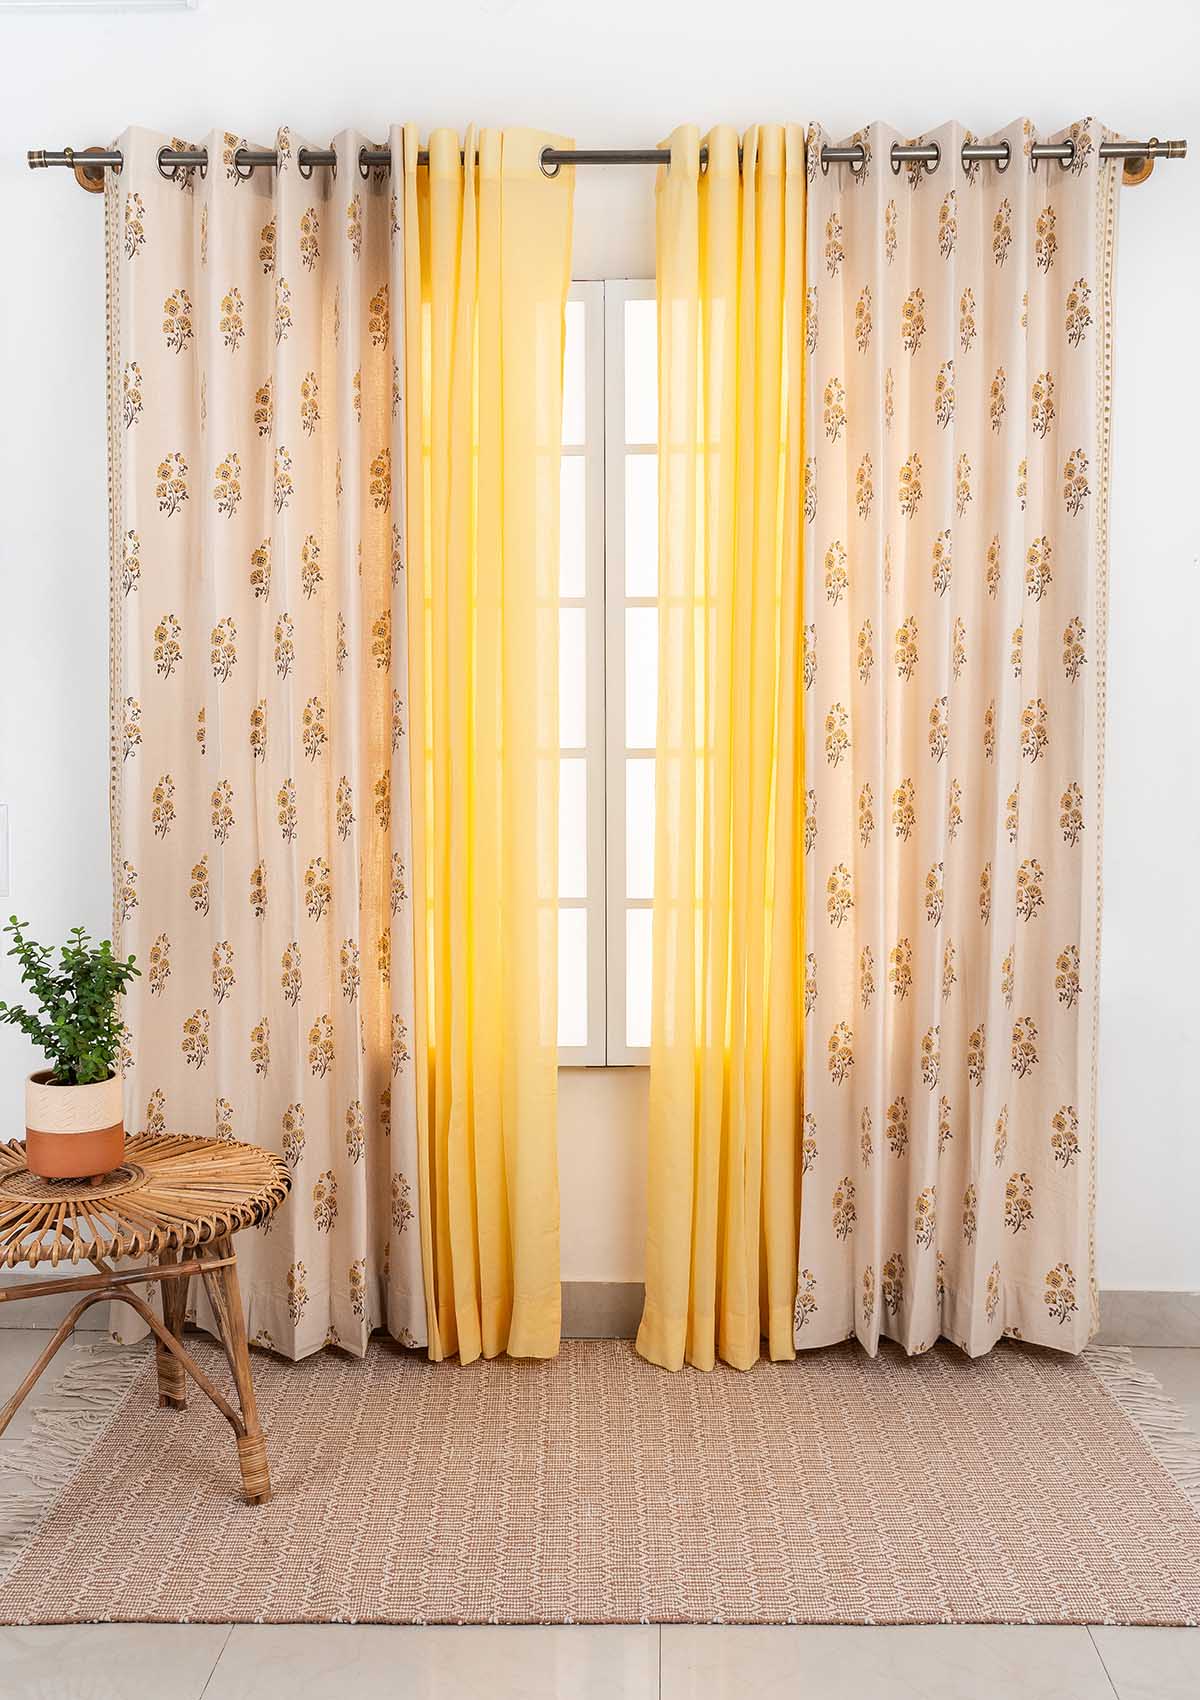 Indus with Turmeric Set Of 4 Combo Cotton Curtain  - Beige And Yellow